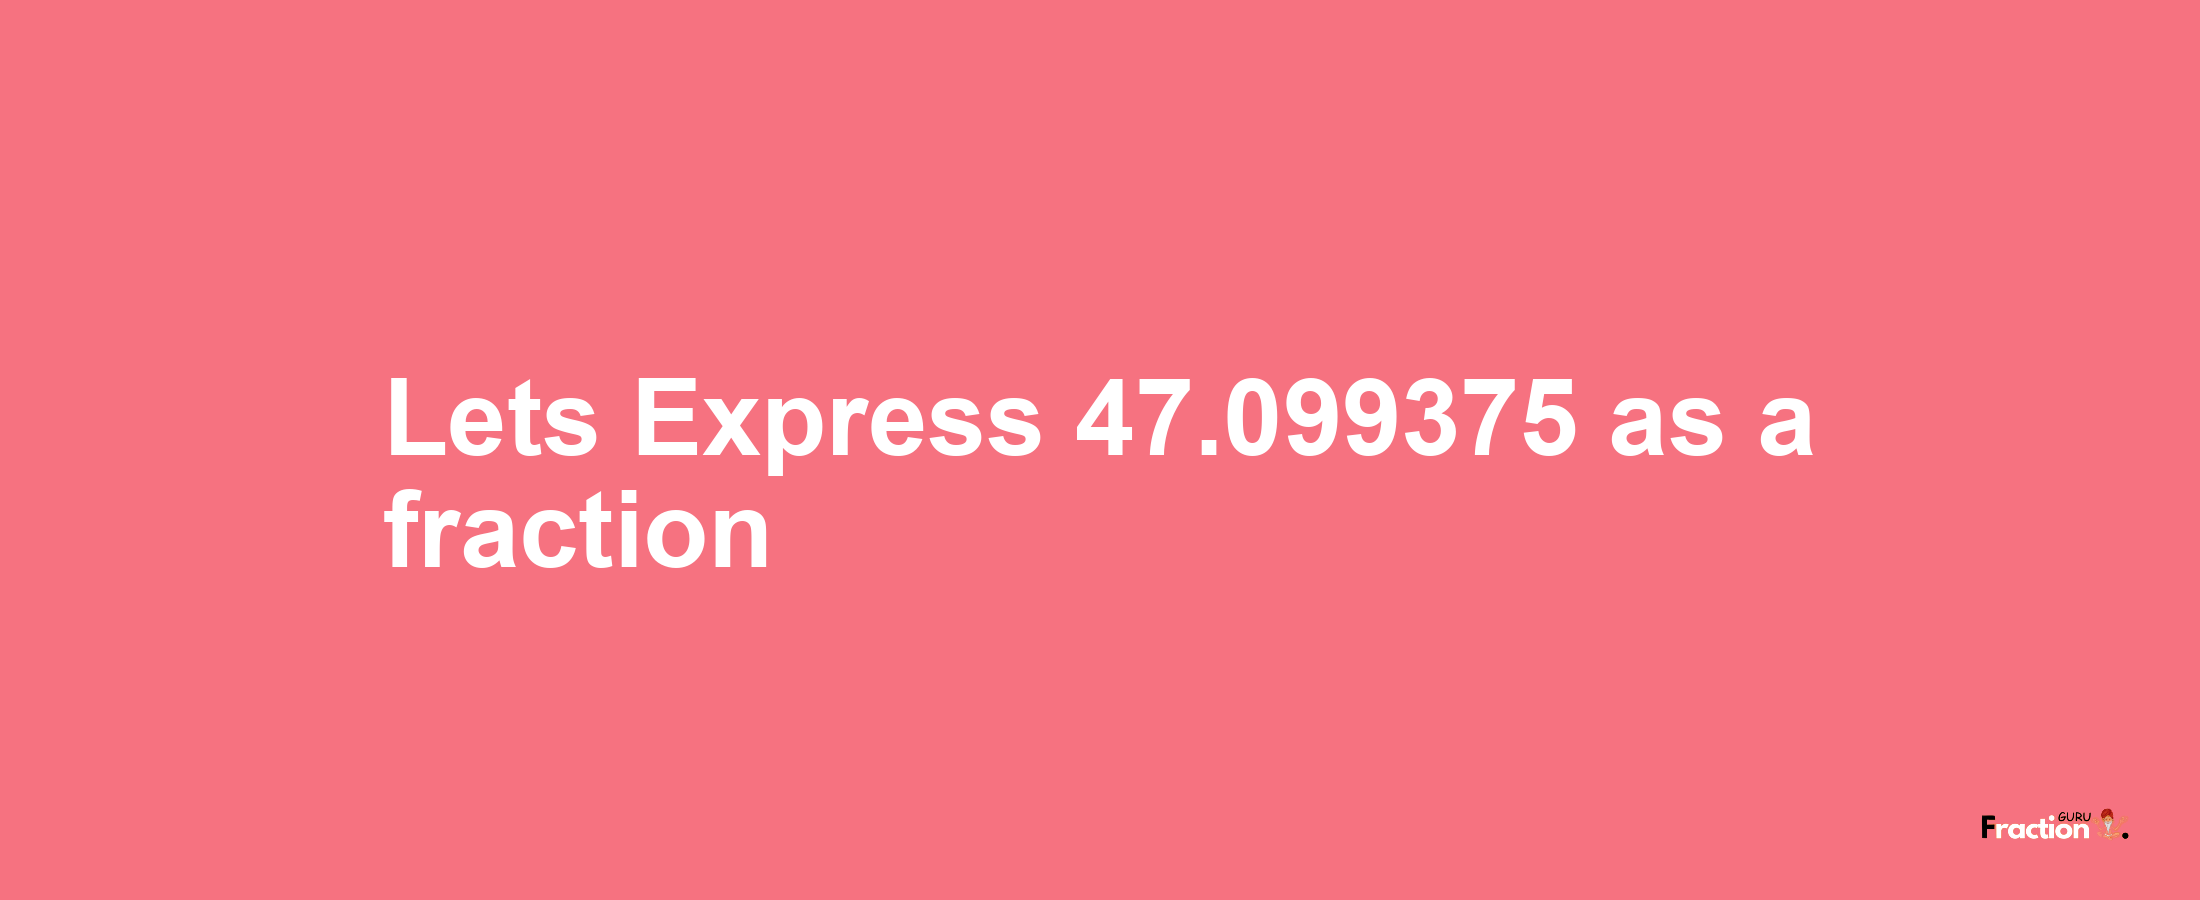 Lets Express 47.099375 as afraction